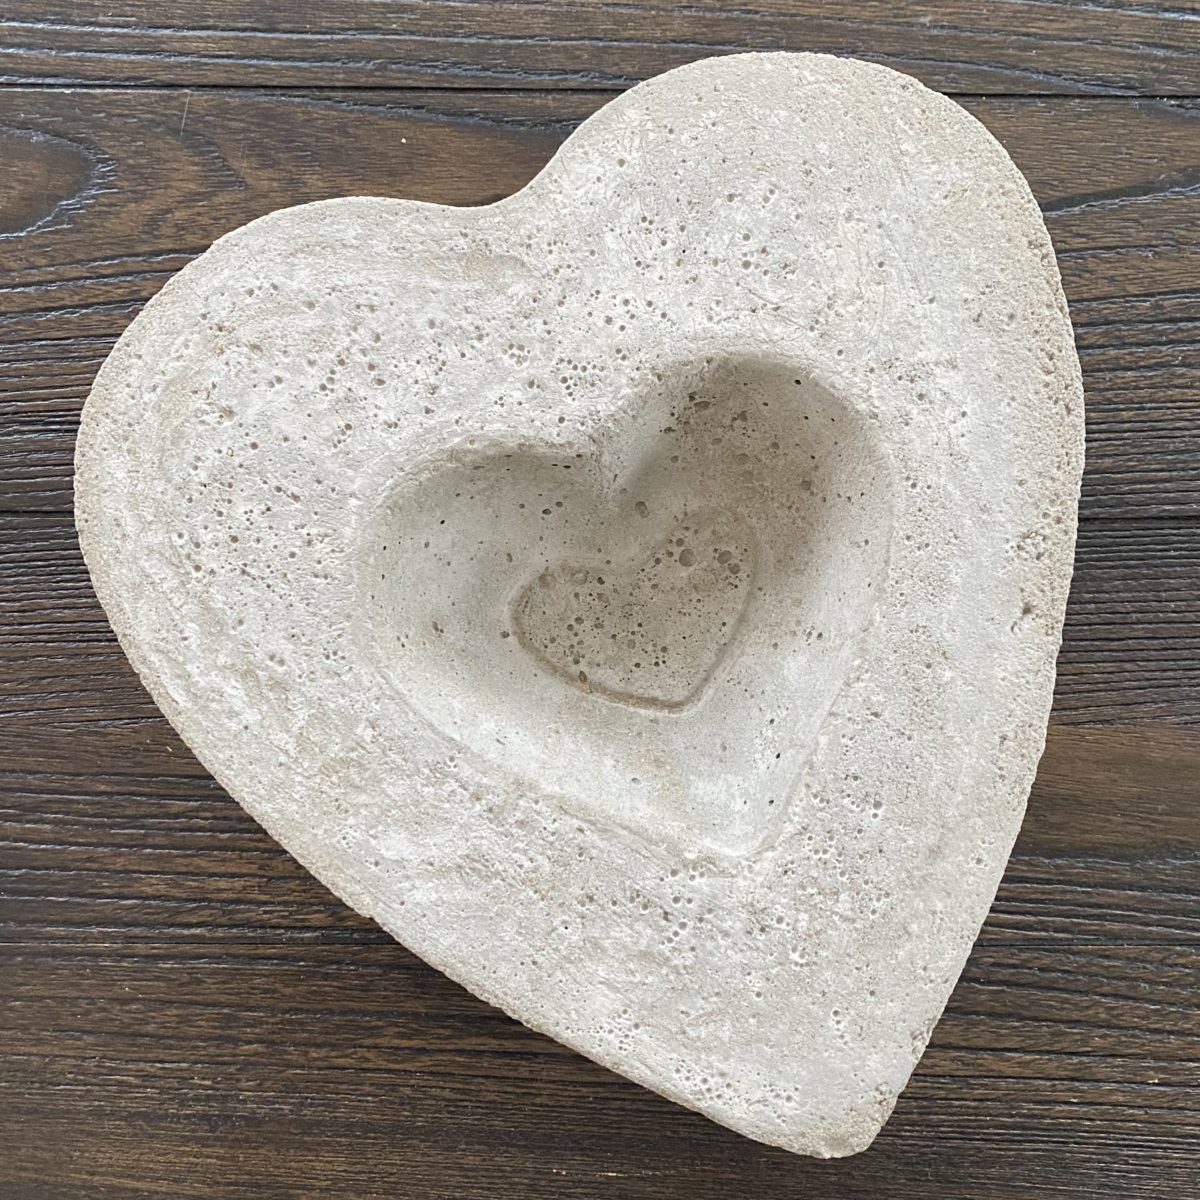 DIY concrete heart planter dry and out of the forms before plants are put in it.